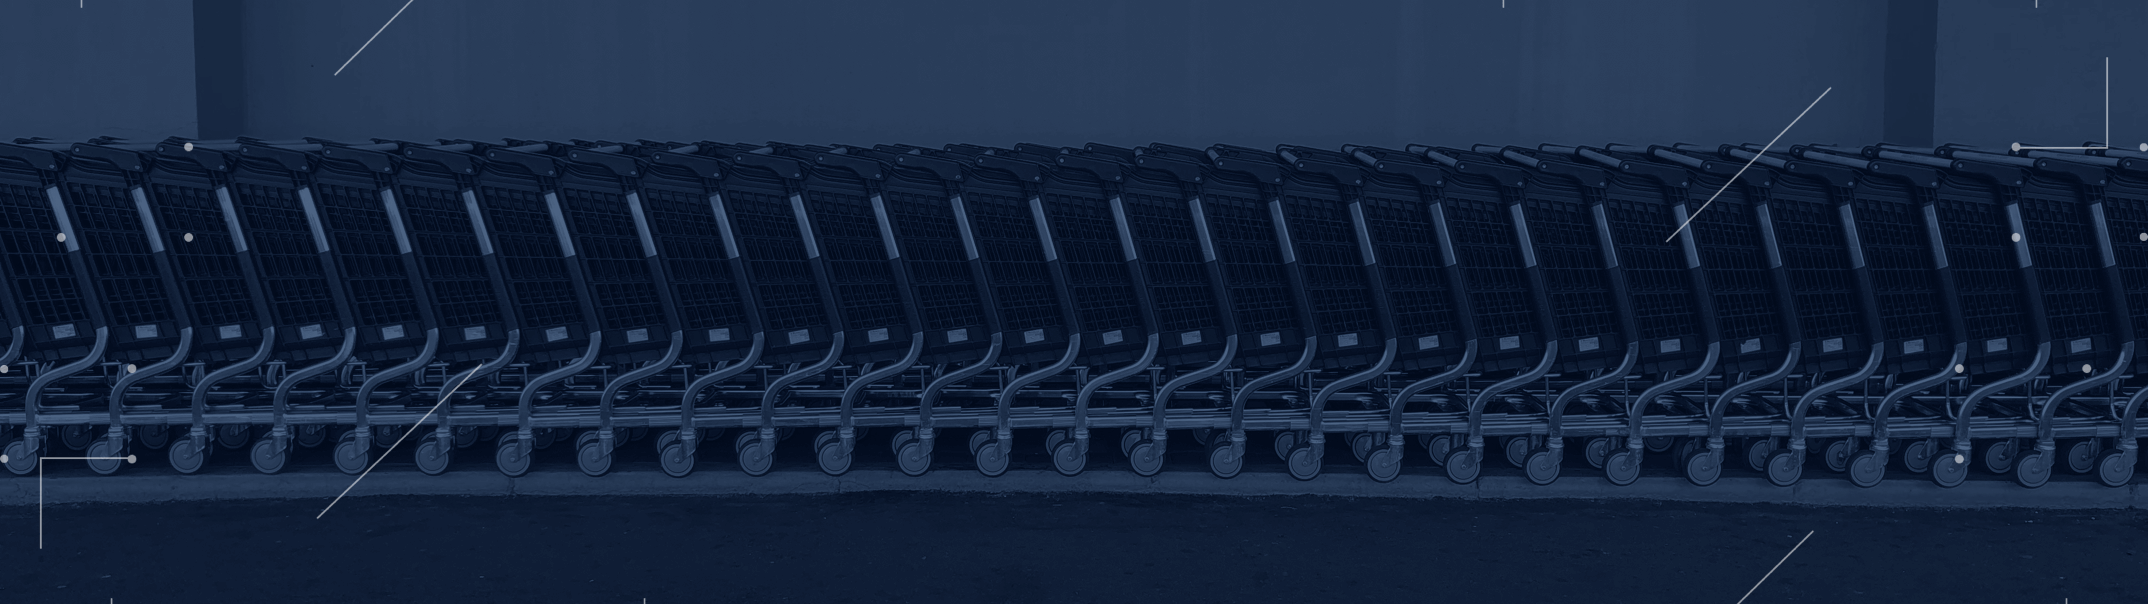 Shopping cart in-store ecommerce image